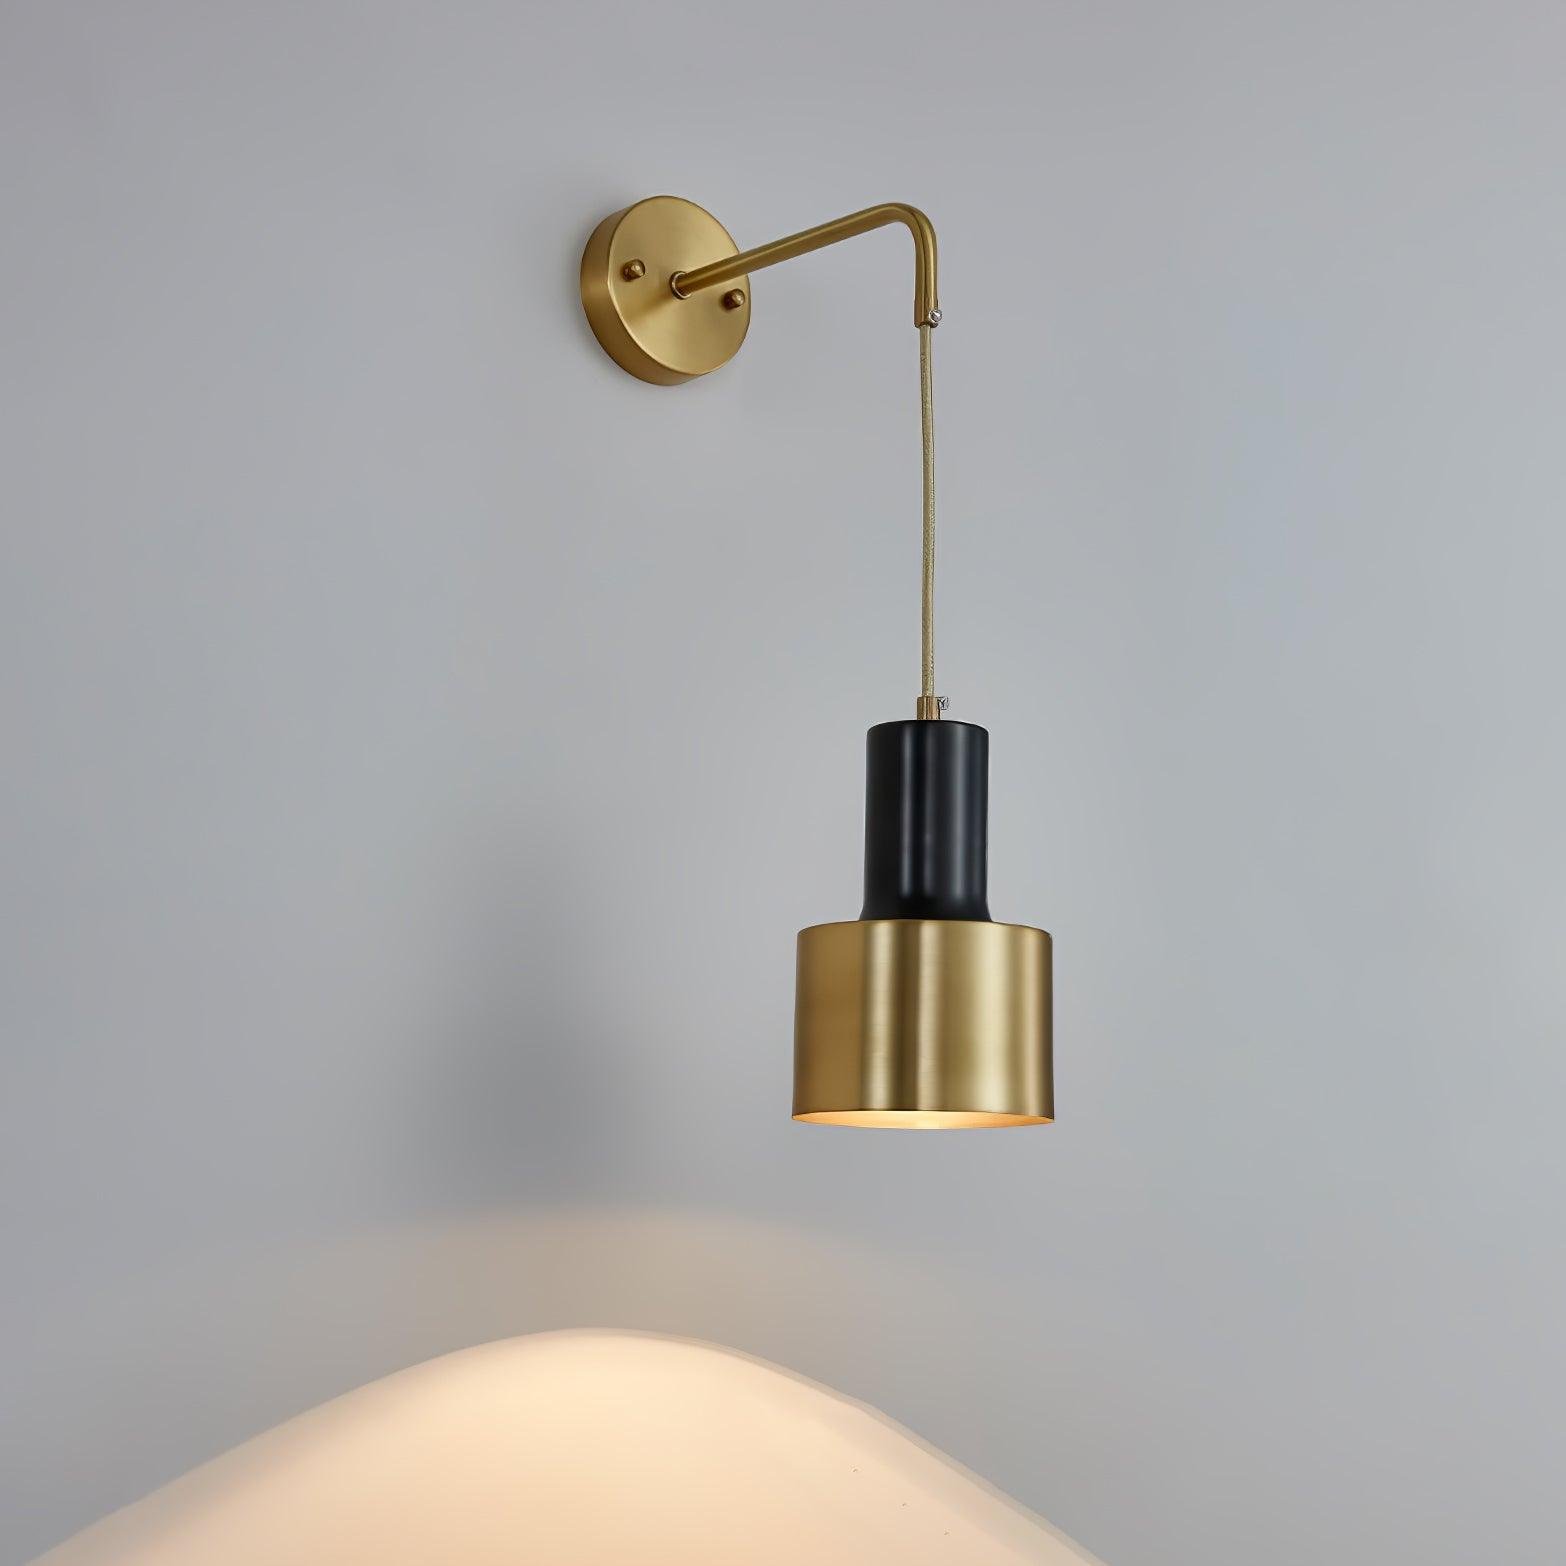 Arne Wall Light in gold and black, measuring 4.7" in diameter and 8.7" in height (12cm x 22cm).